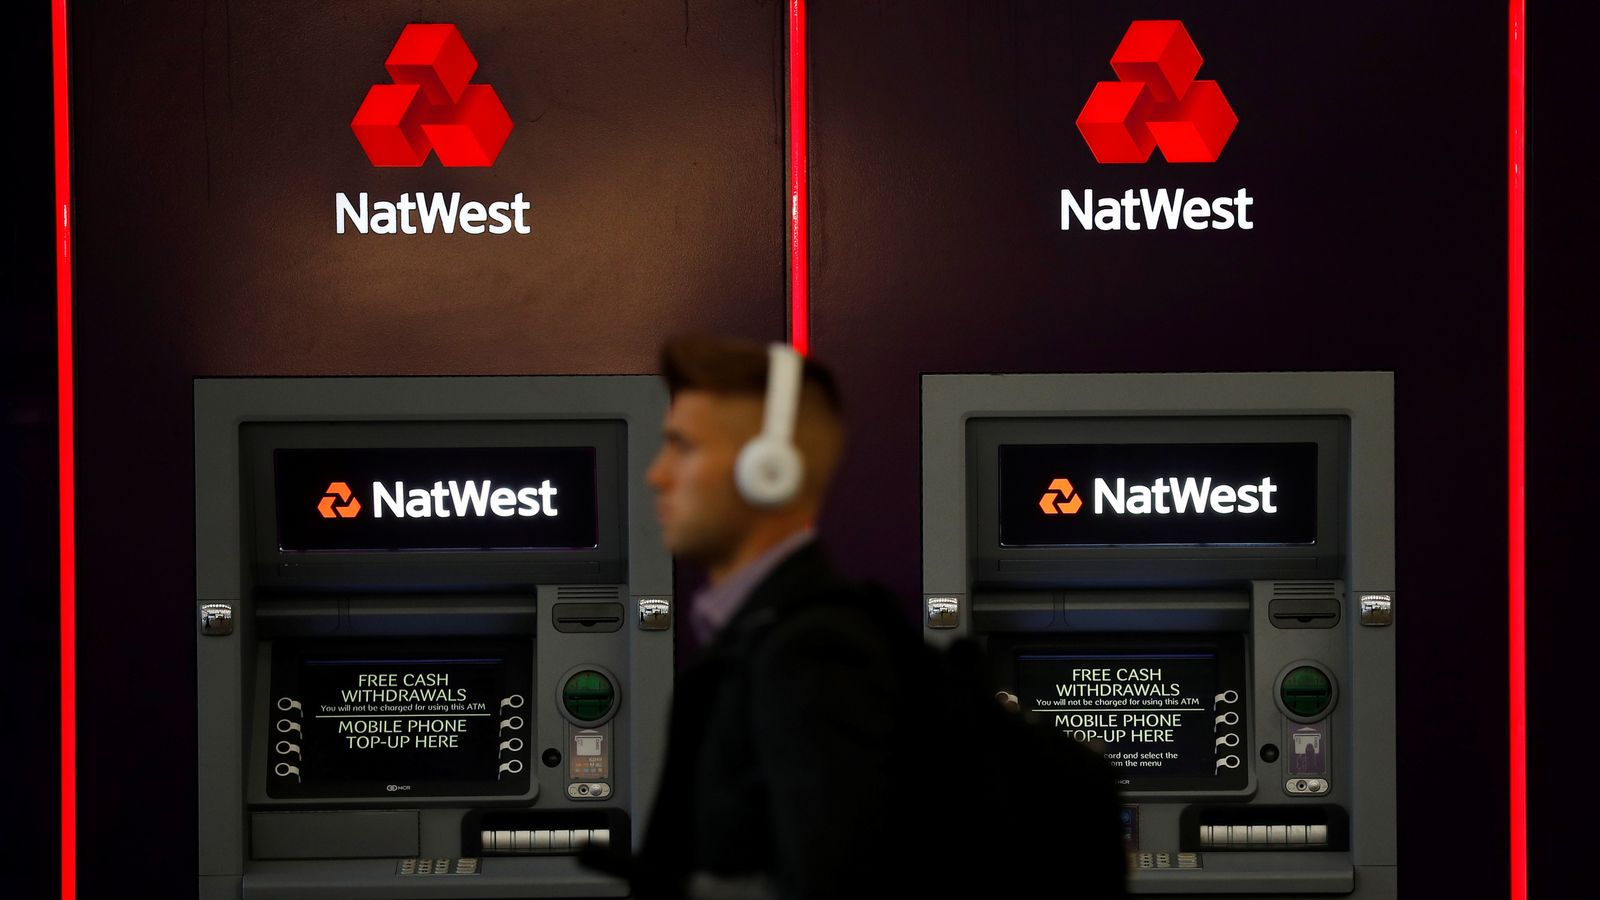 Government brings ownership of NatWest to 22.5%